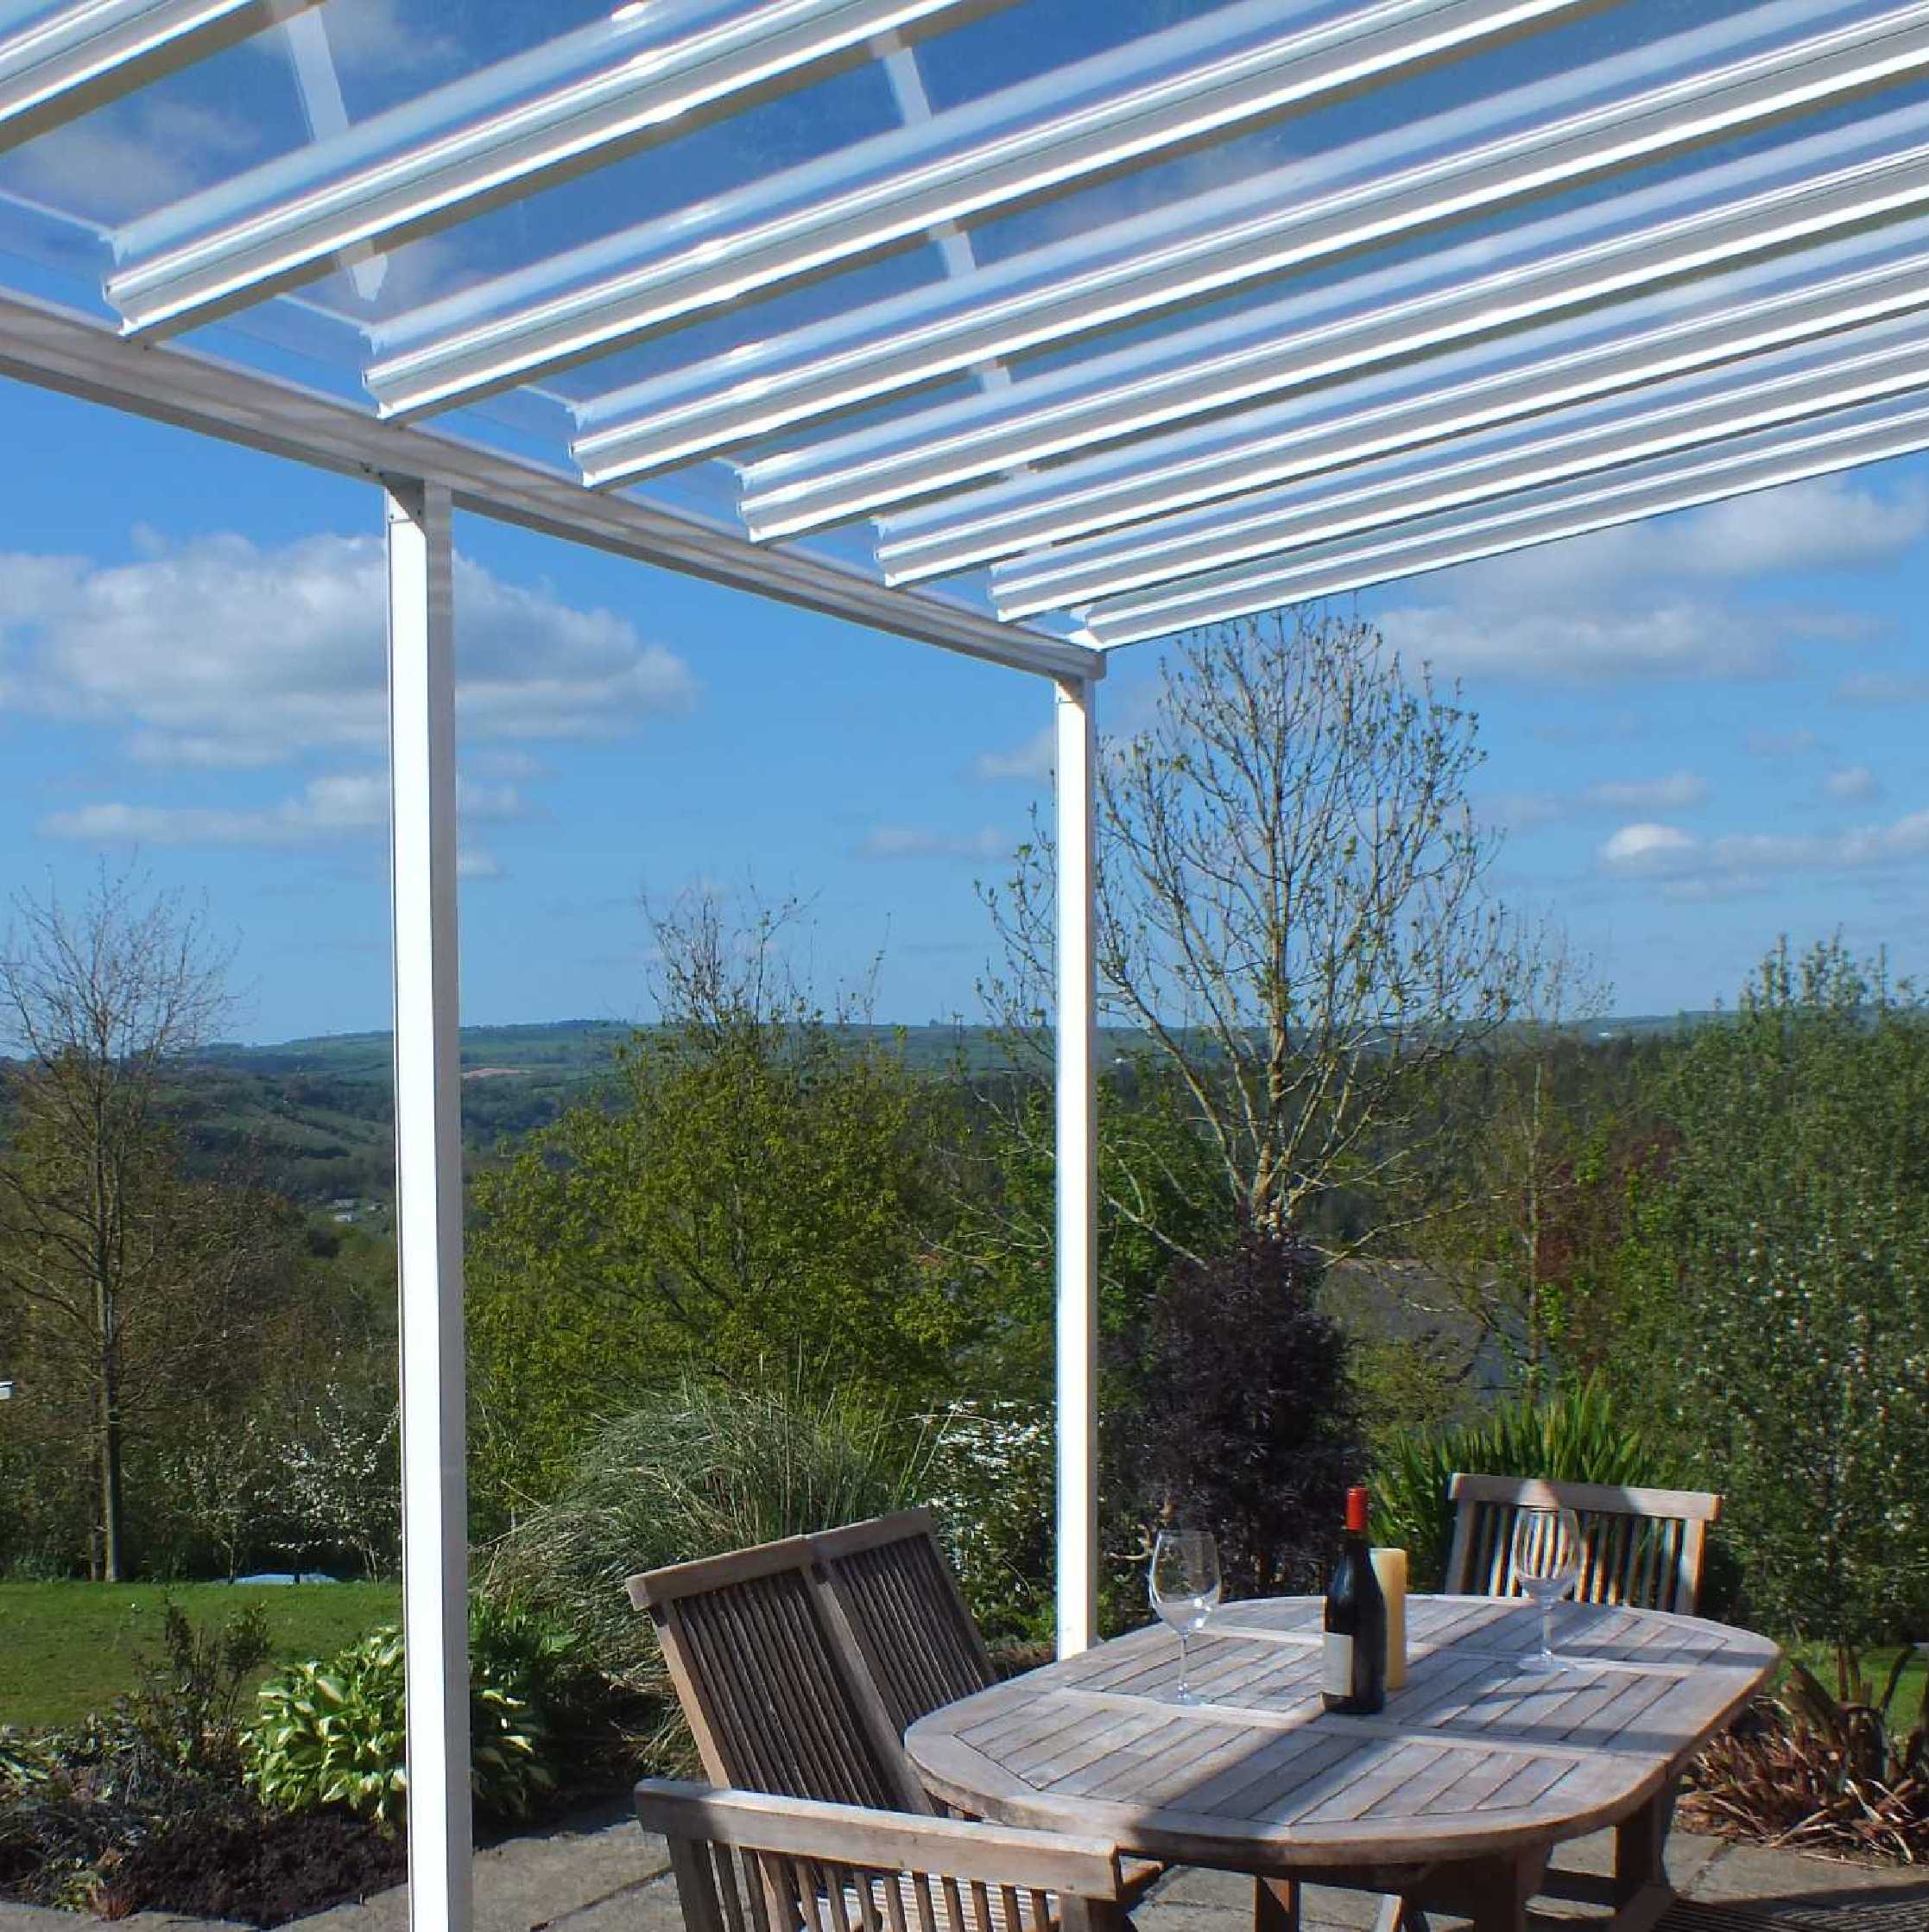 Buy Omega Smart Lean-To Canopy, White with 6mm Glass Clear Plate Polycarbonate Glazing - 7.7m (W) x 2.5m (P), (4) Supporting Posts online today